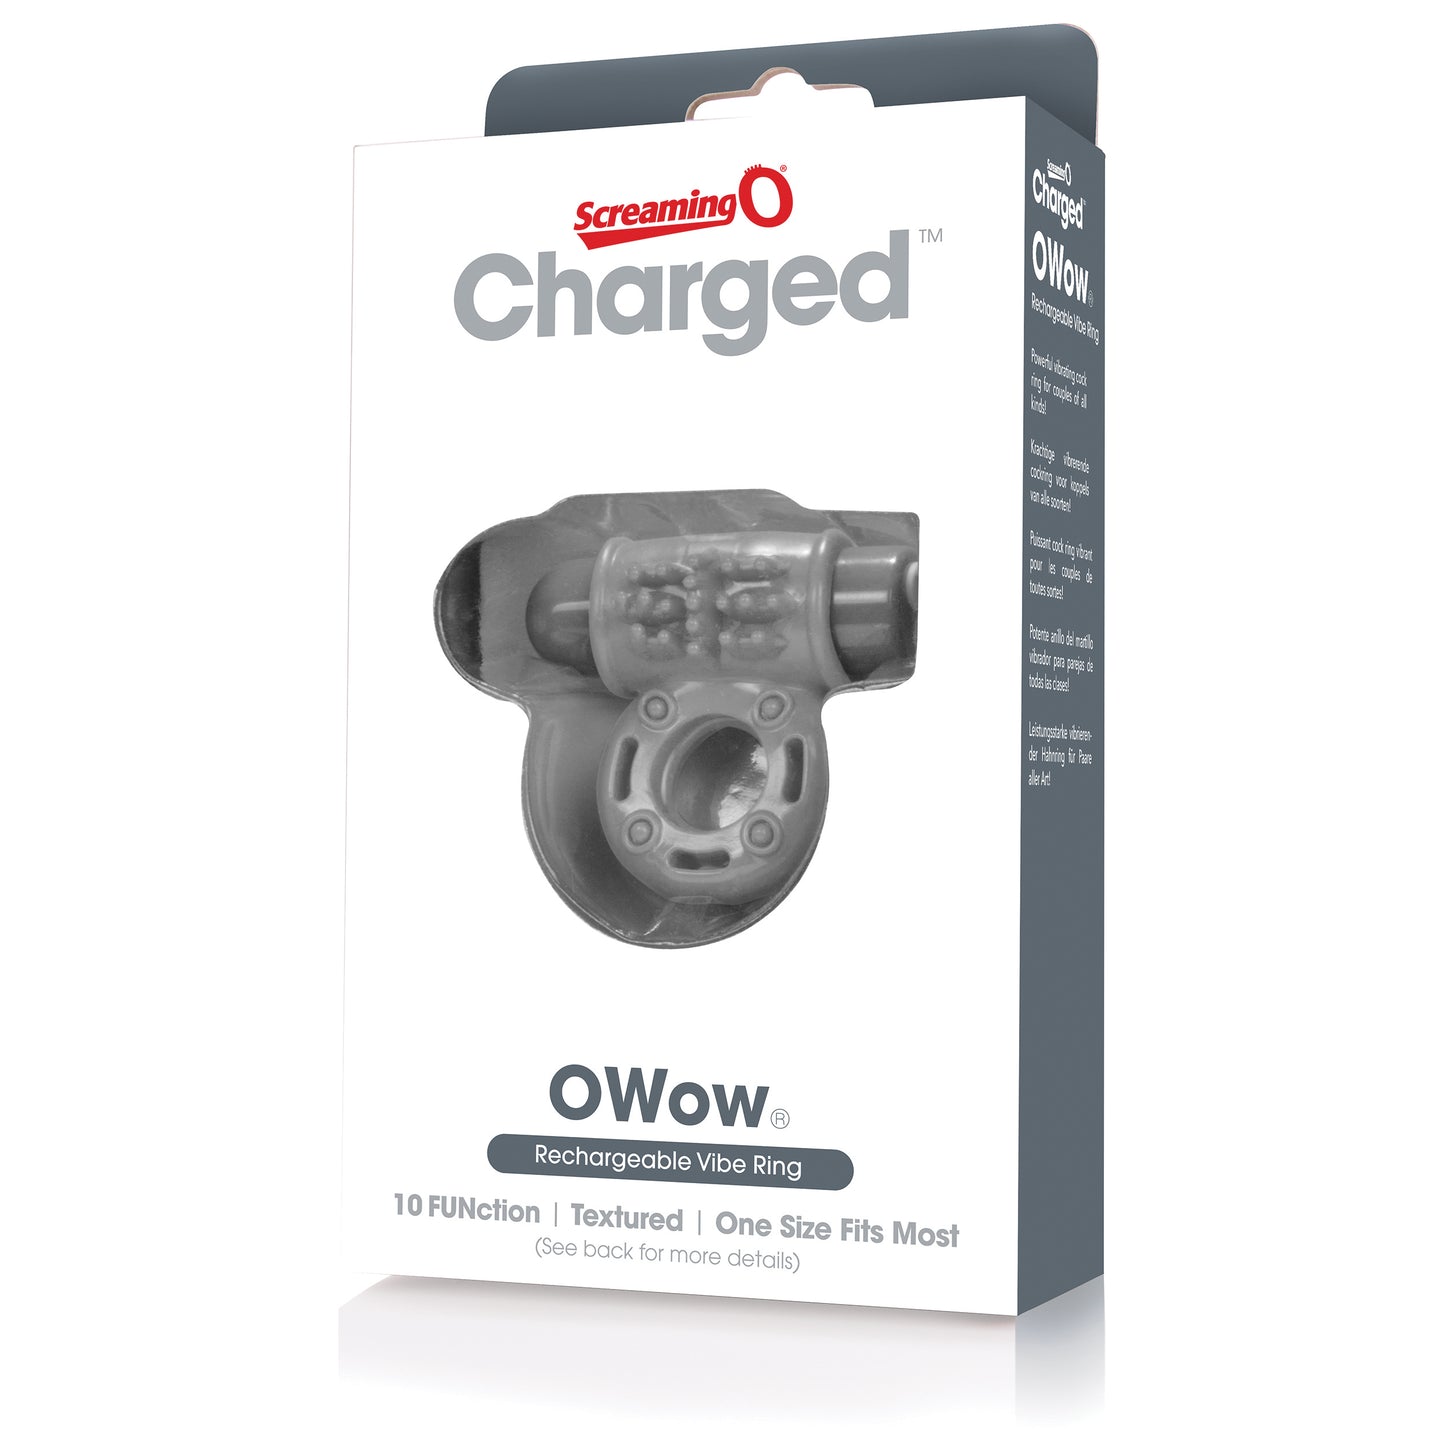 Charged Owow Rechargeable Vibe Ring - Grey